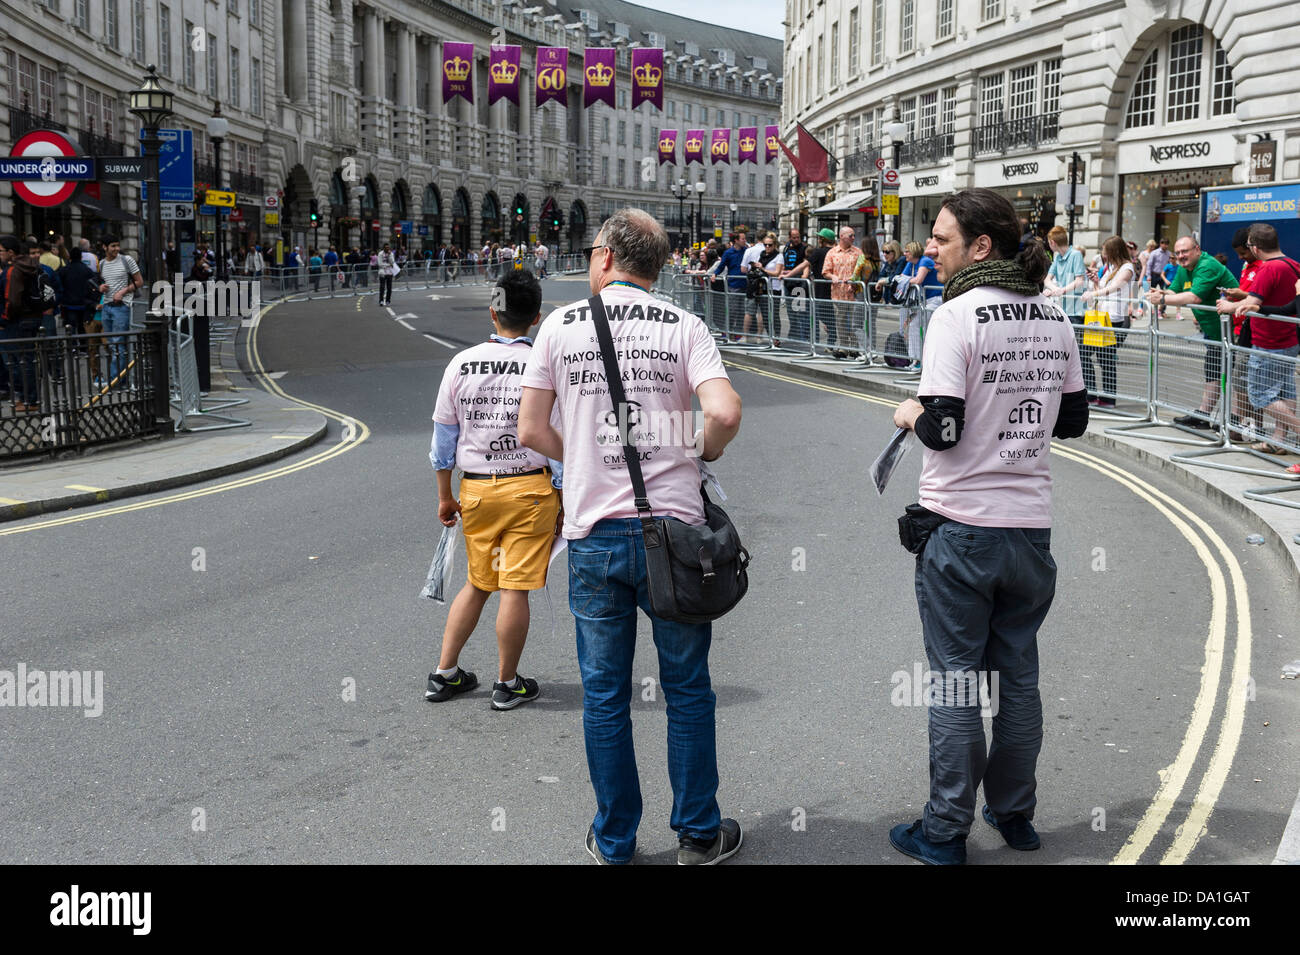 Stewards waiting for the London Pride parade to start. Stock Photo